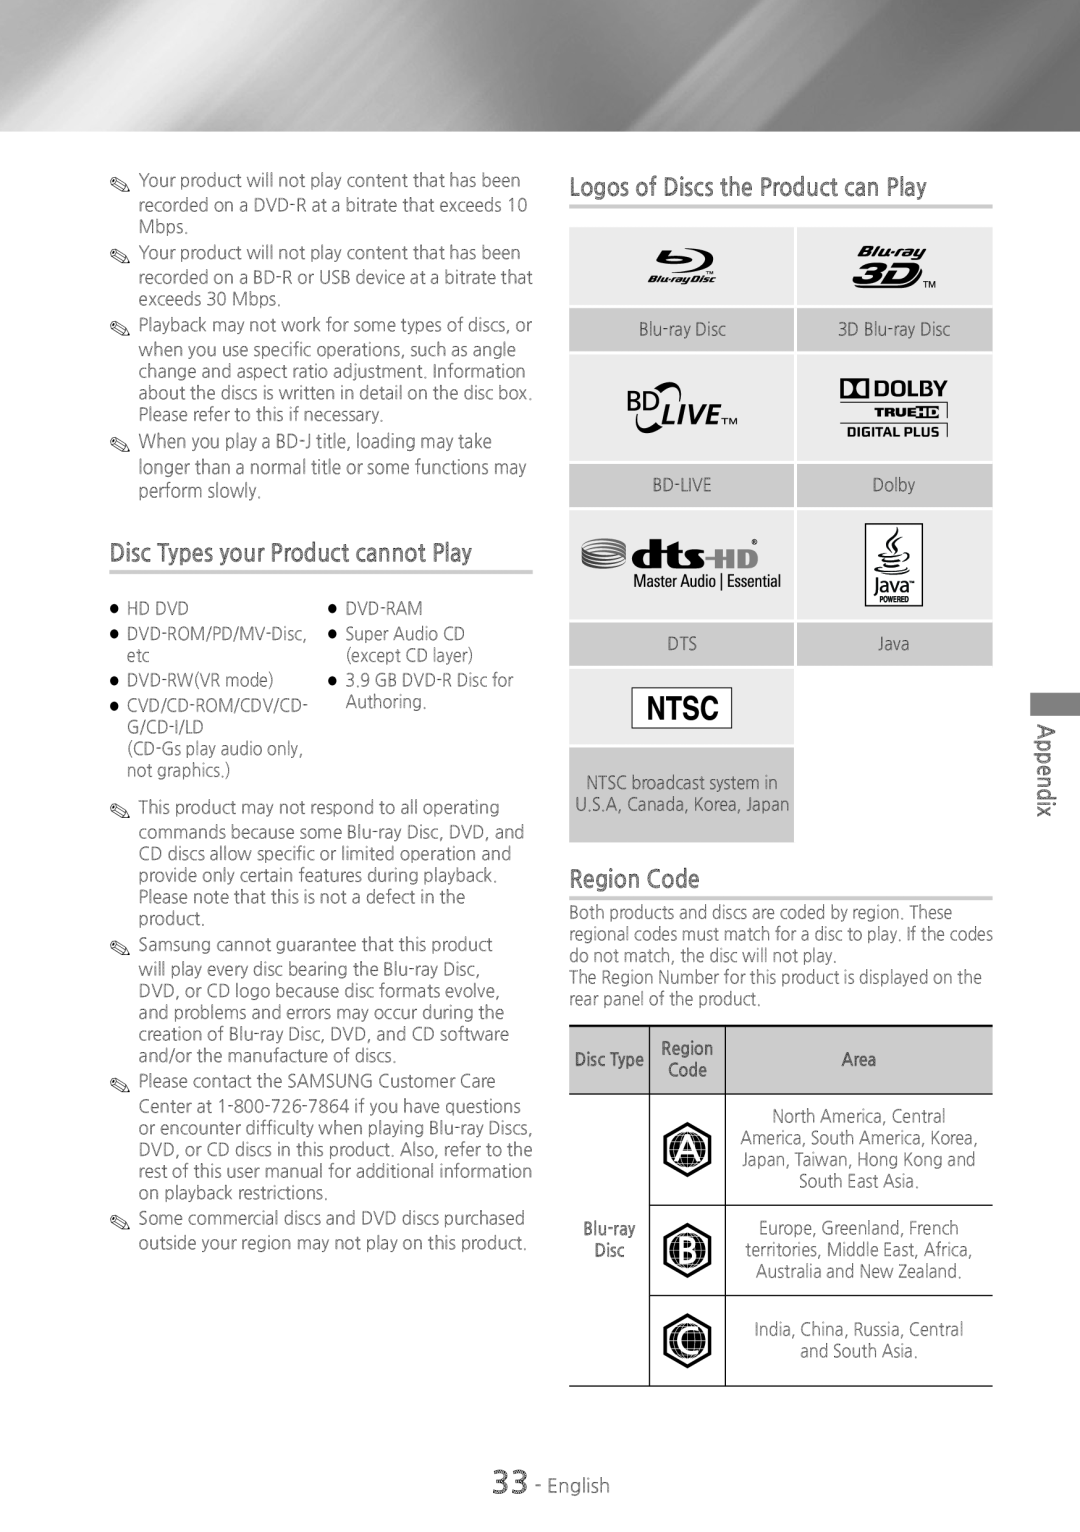 Samsung HT-H4500 user manual Disc Types your Product cannot Play, Logos of Discs the Product can Play, Region Code 